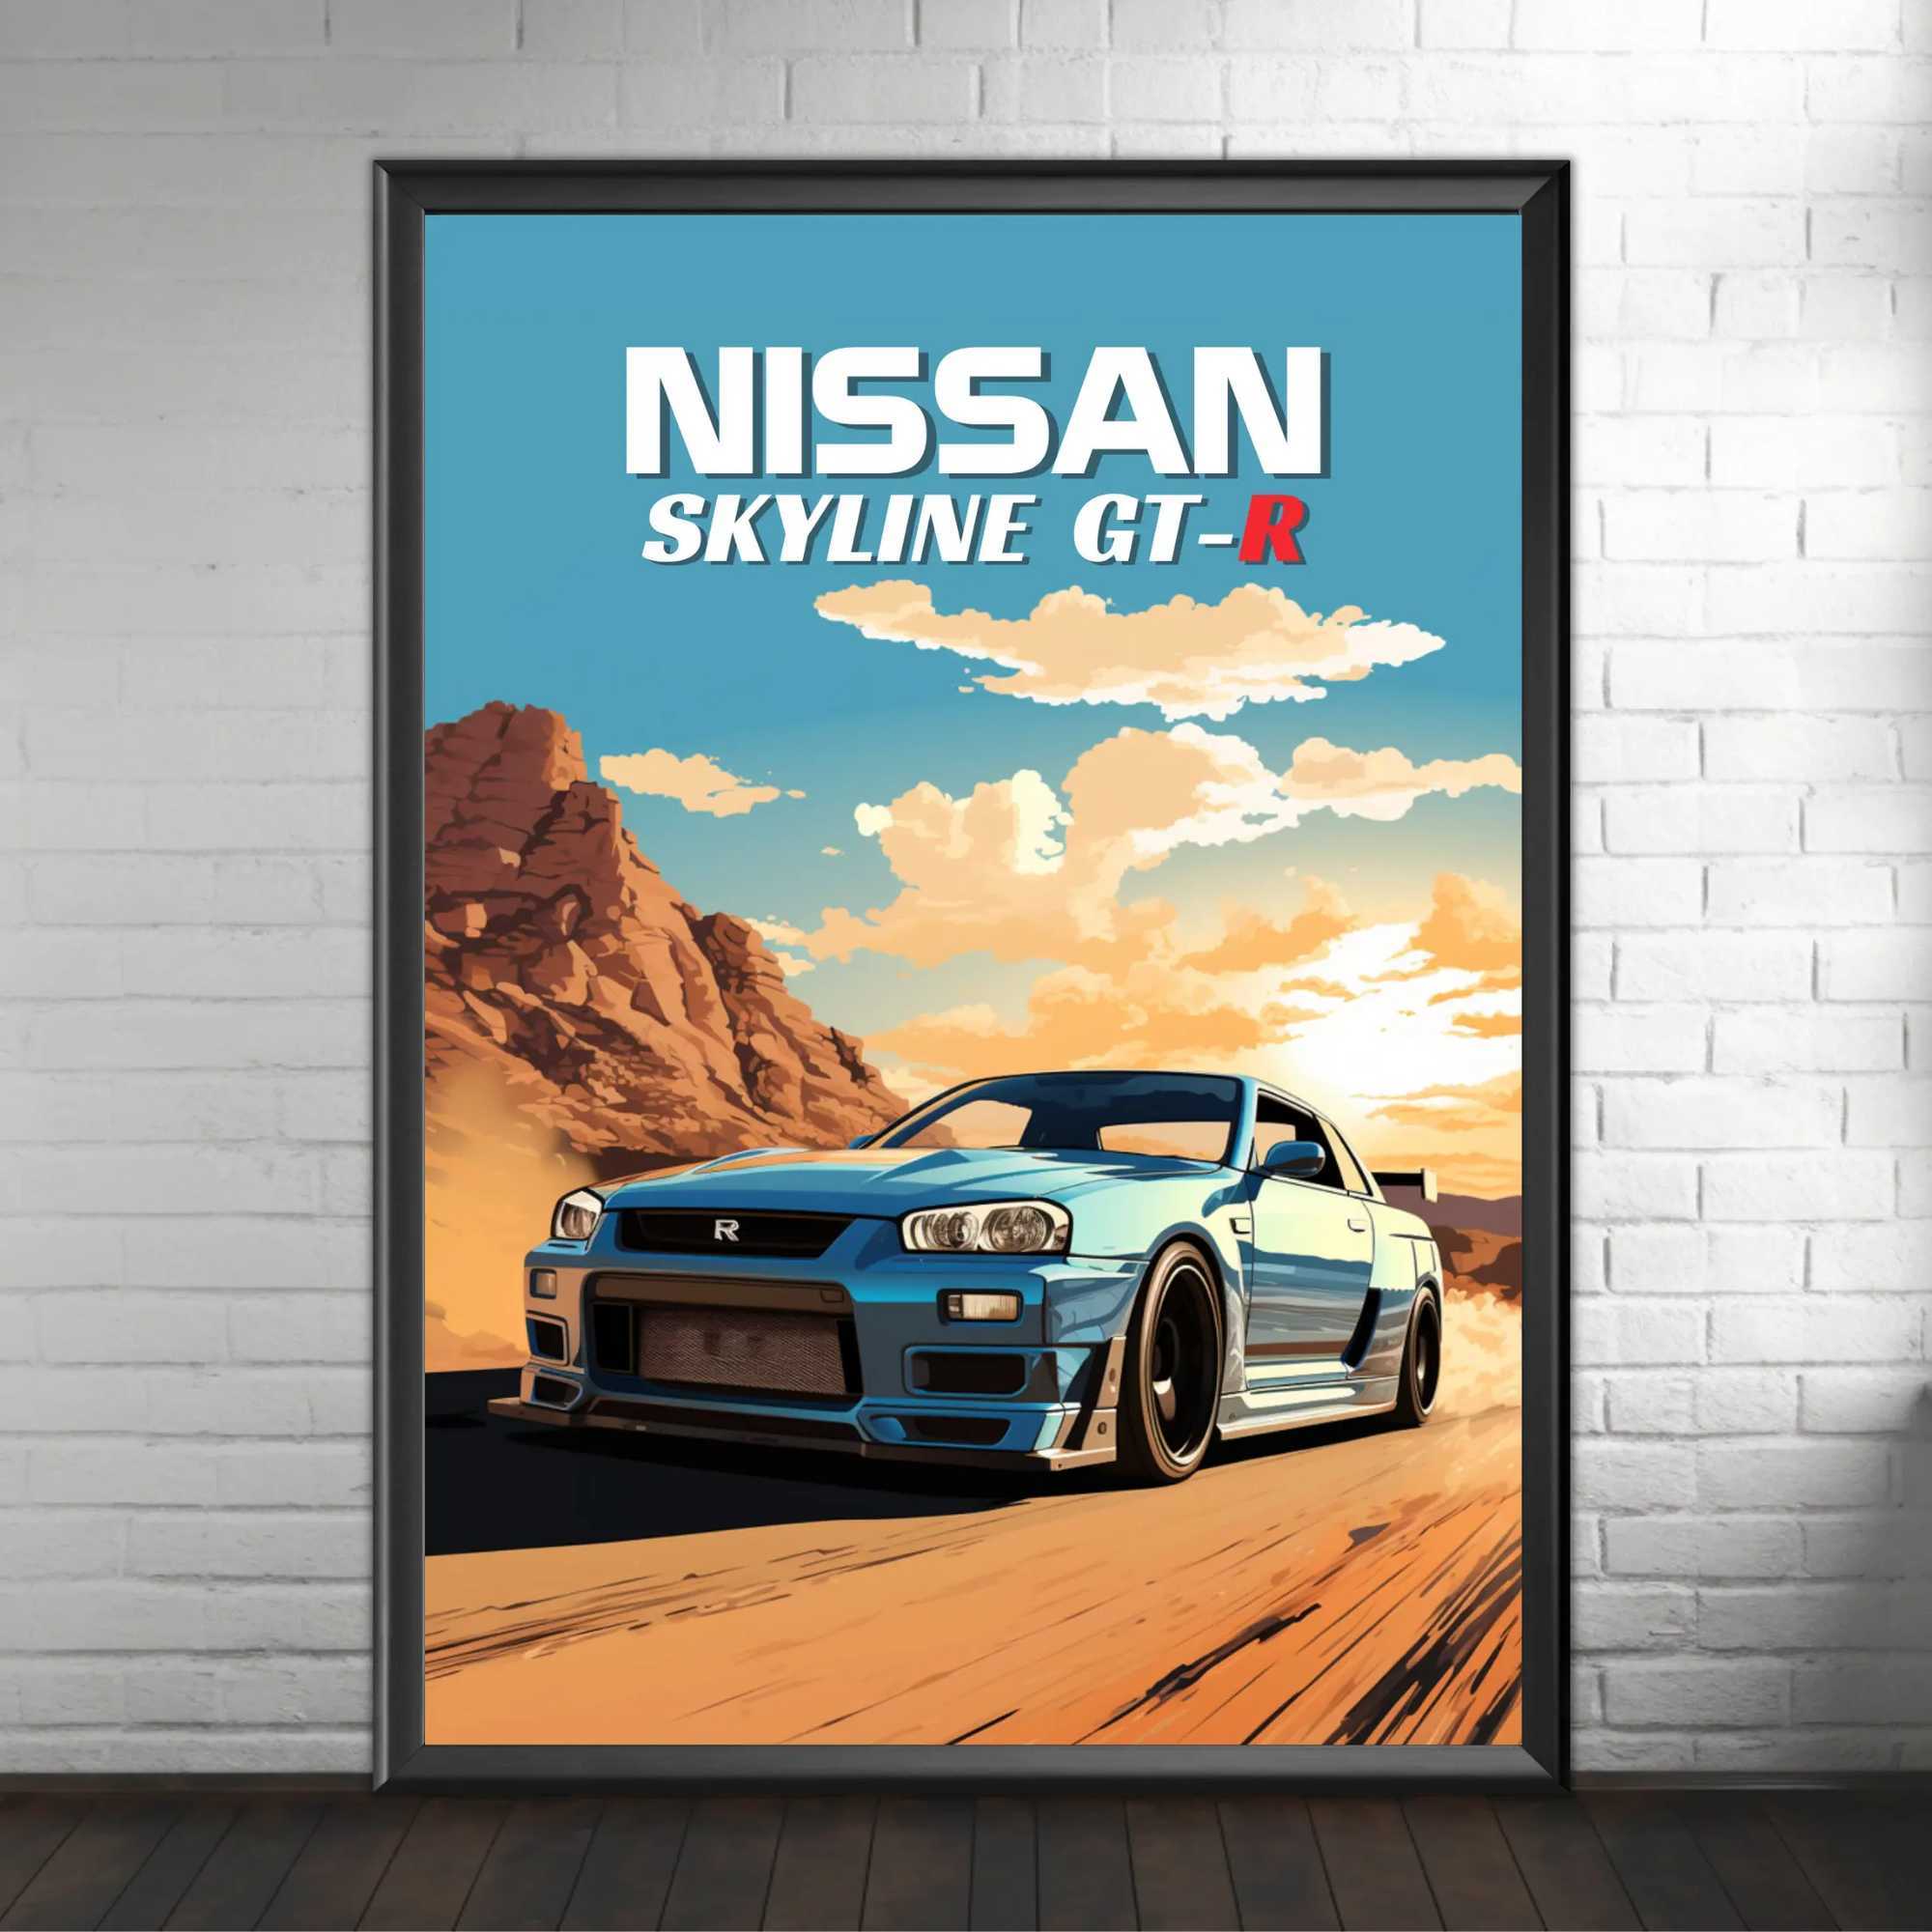 Paintings Japanese Car 1990s Car Nissan Skyline GT-R R34 Retro Poster Canvas Painting Wall Art Pictures Home Interior Decor